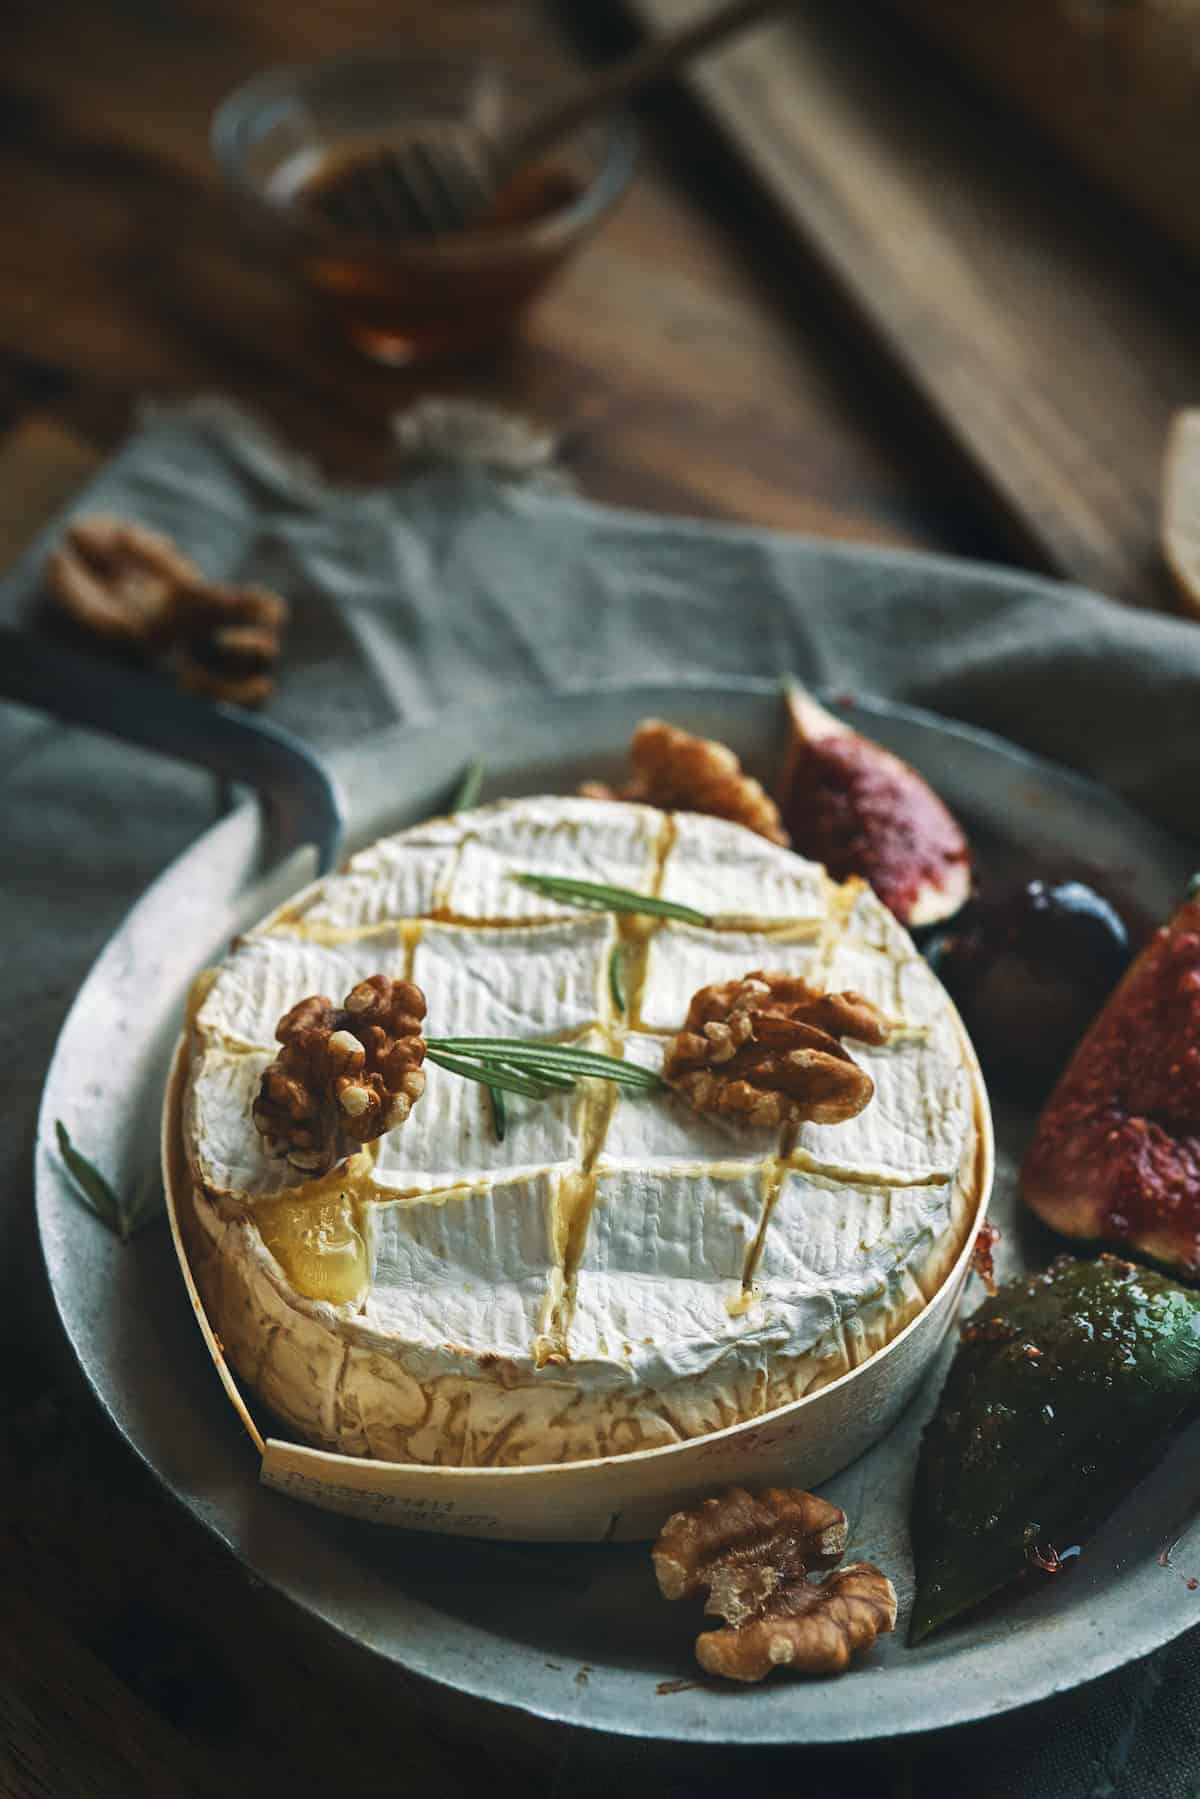 Baked camembert cheese on a plate with walnuts on top